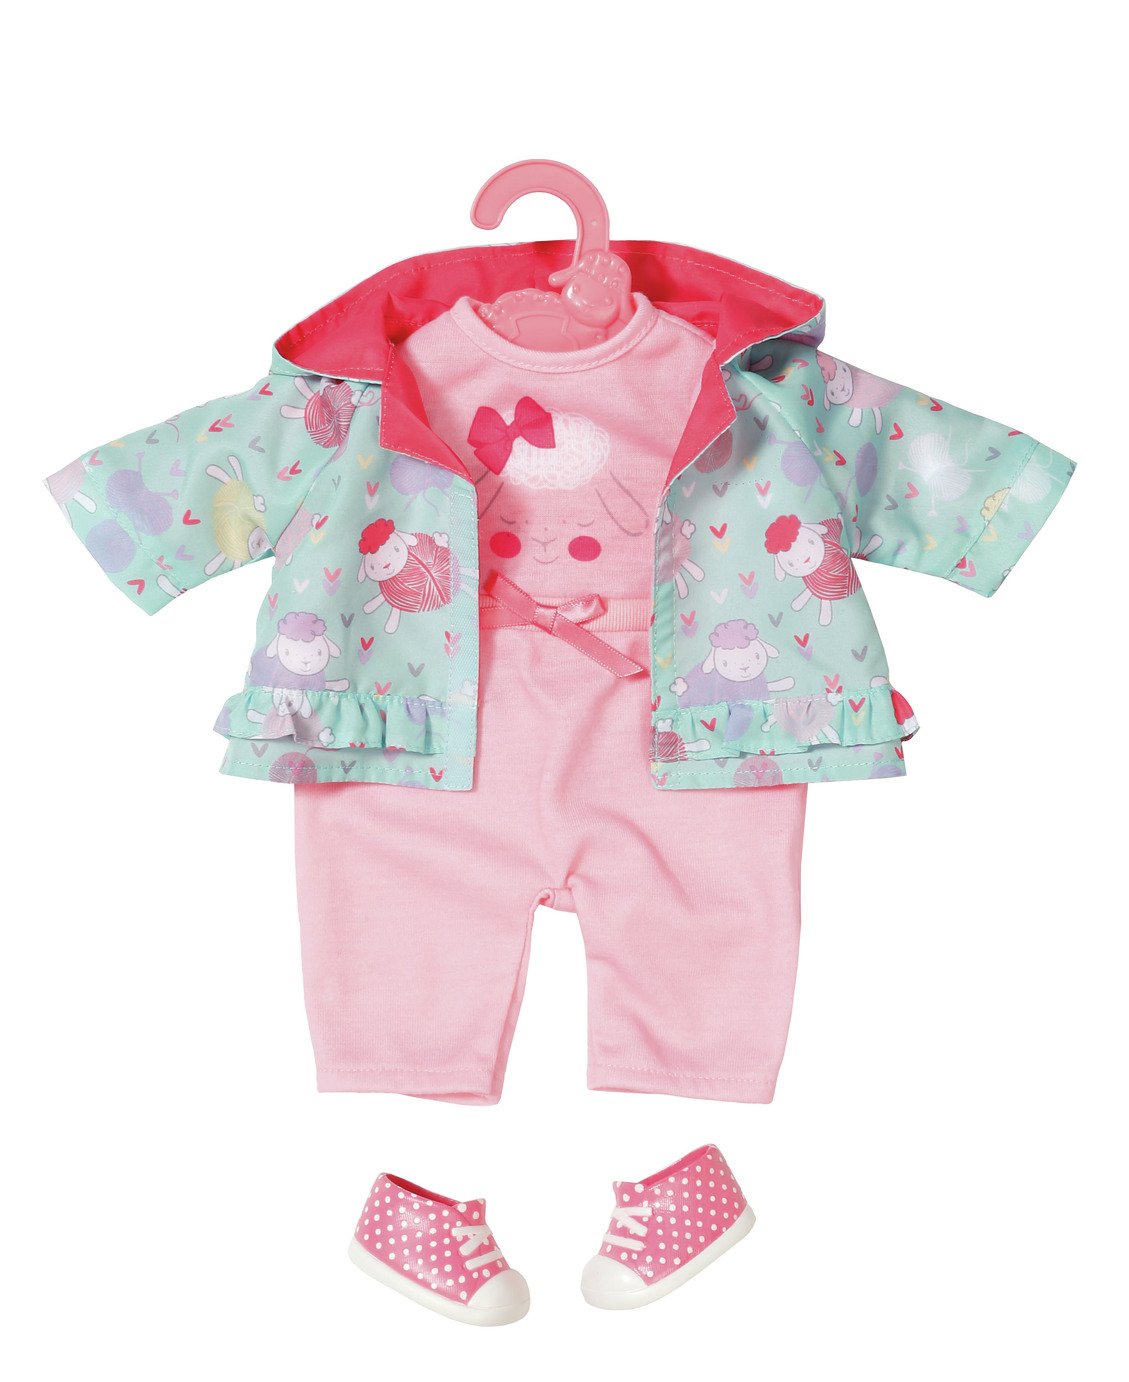 Baby Annabell Little Annabell Little Play Outfit Review